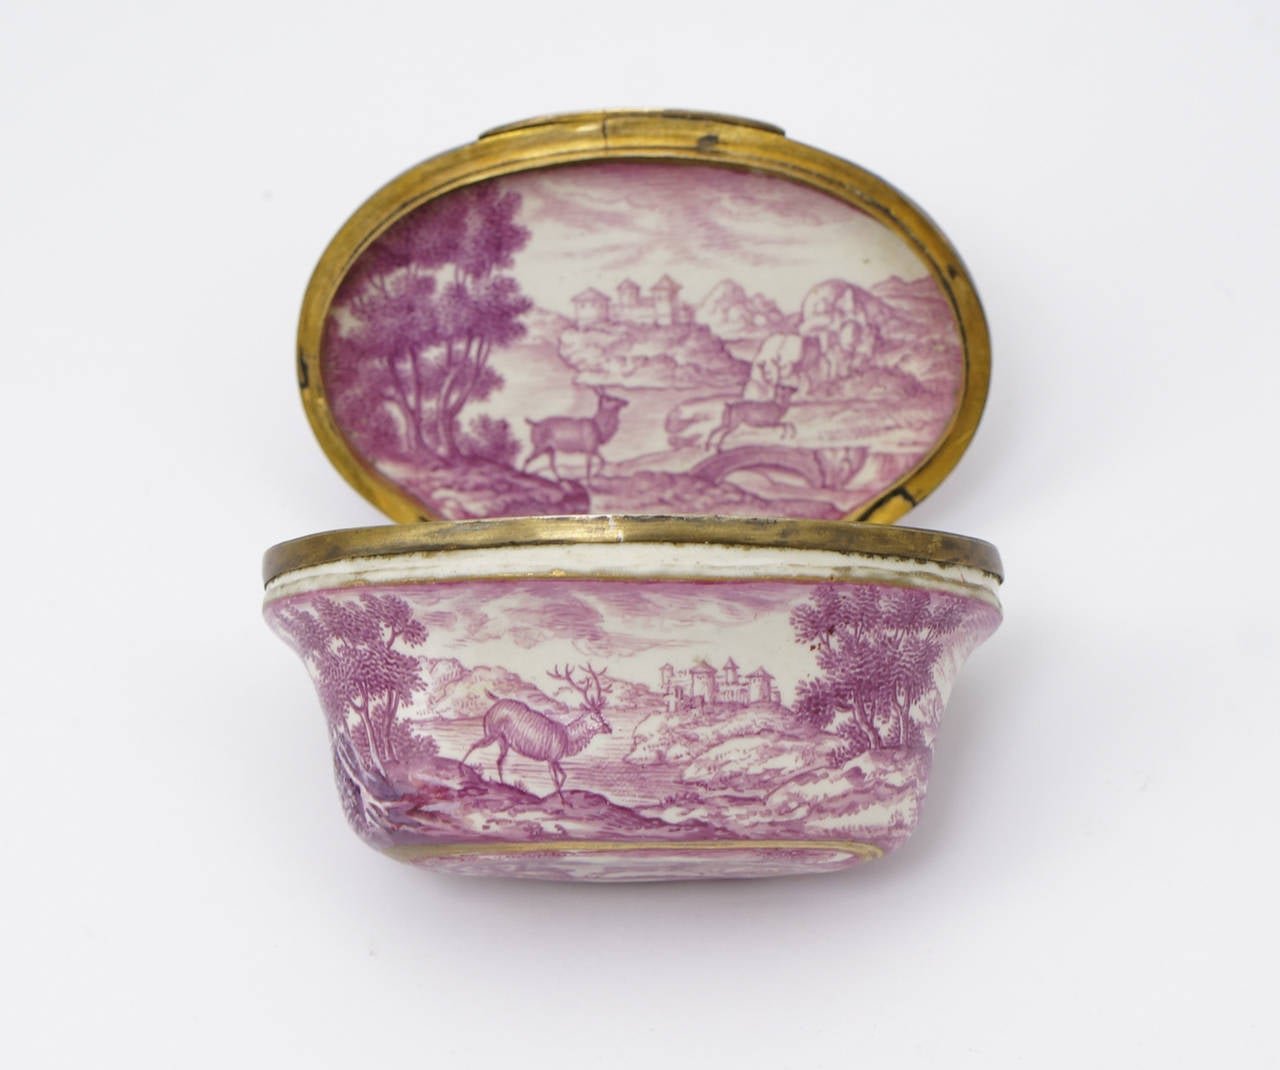 Italian snuff box, finely painted with scenes of deer in wooded landscapes, with castles in the distance, with a gilt brass mount.
Attributed to Doccia, probably painted by J. K. W. Anreiter, circa